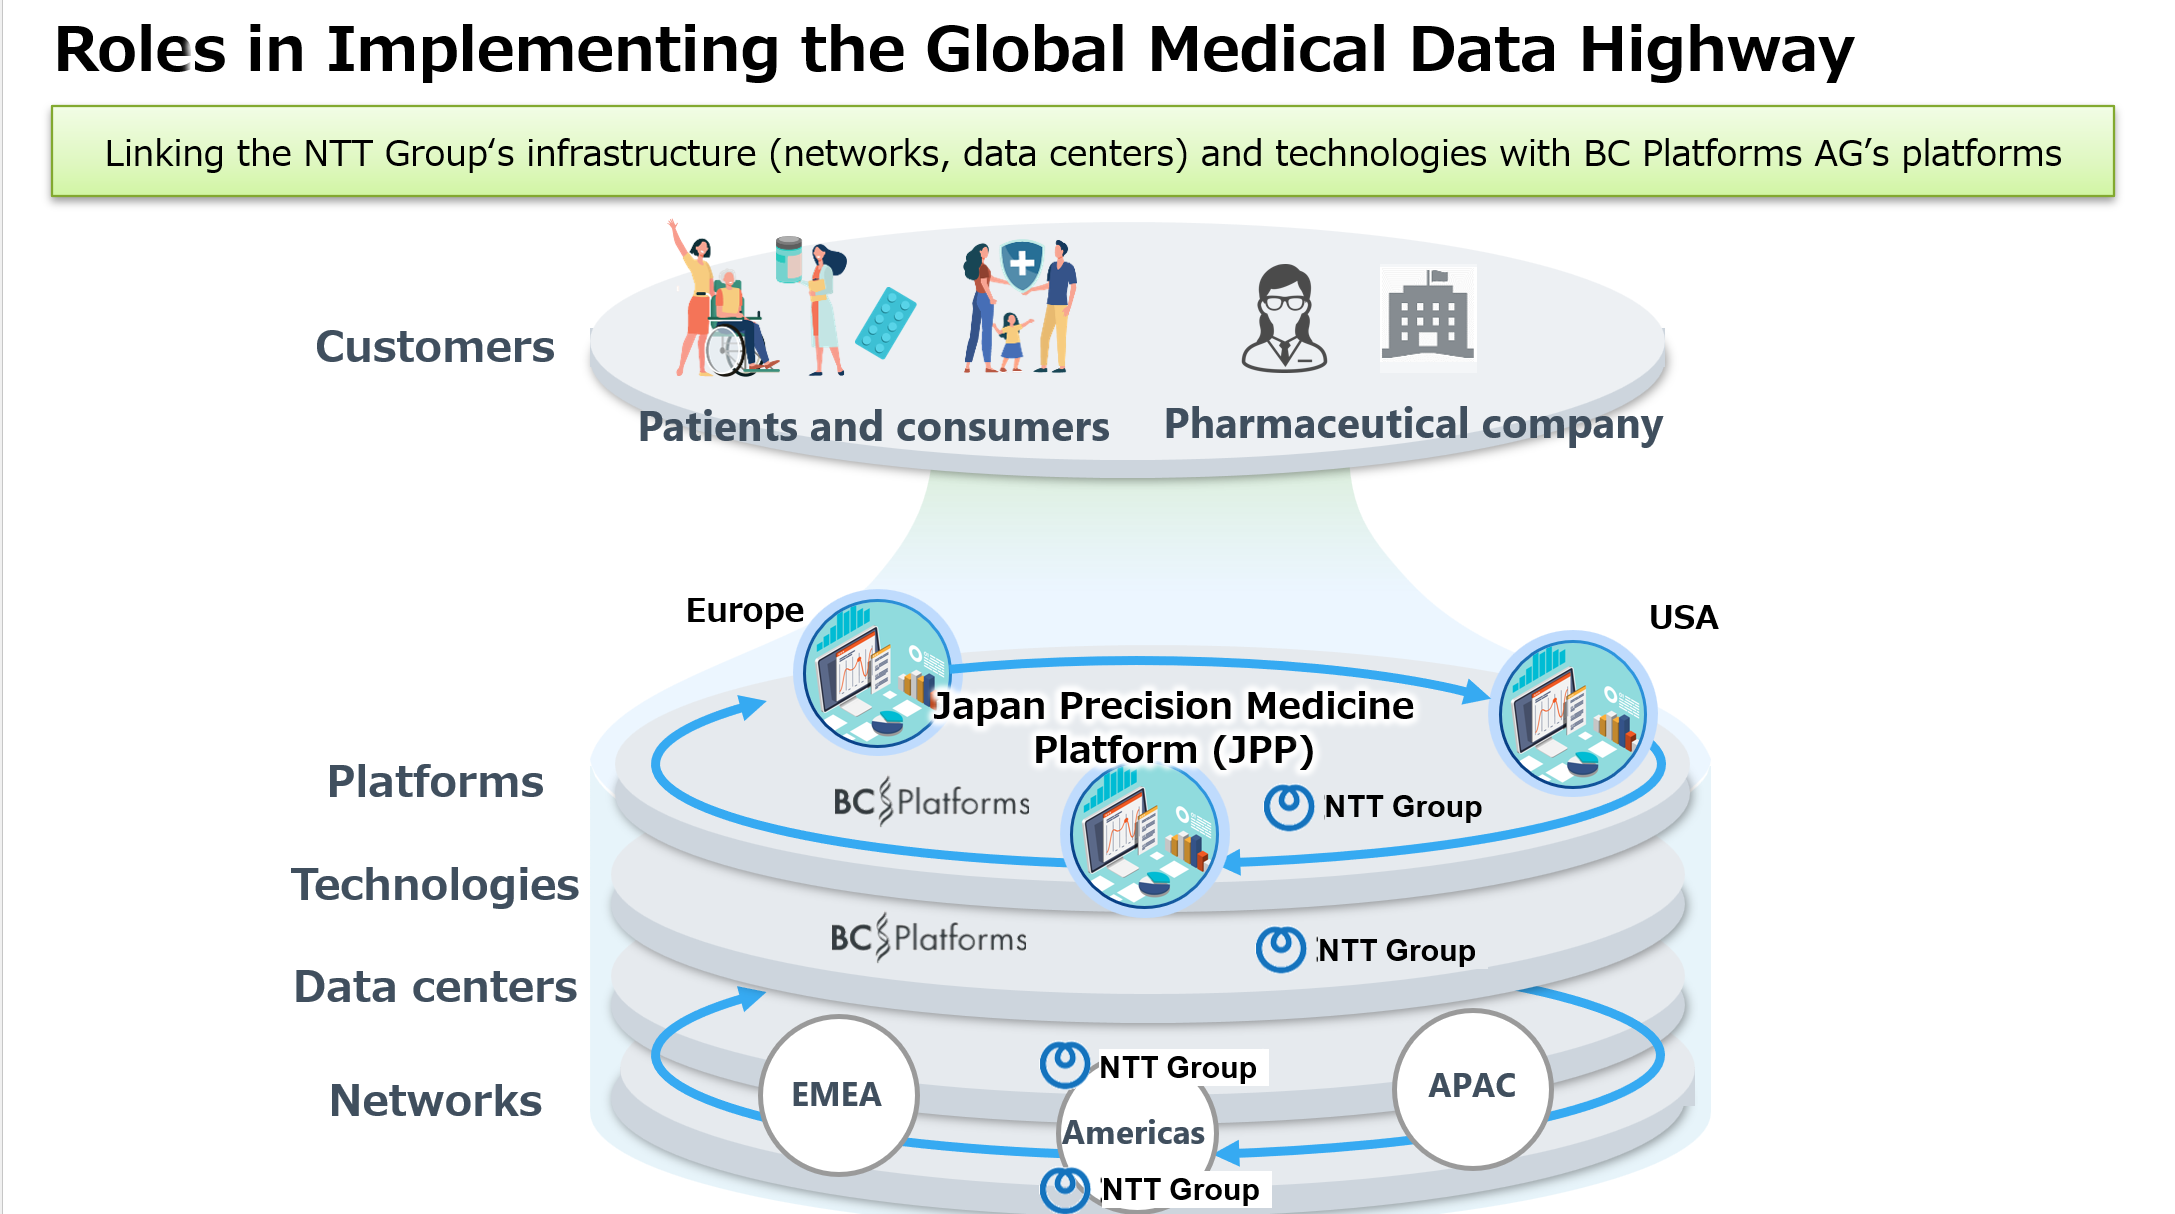 Figure 3: Roles in Implementing the Global Medical Data Highway